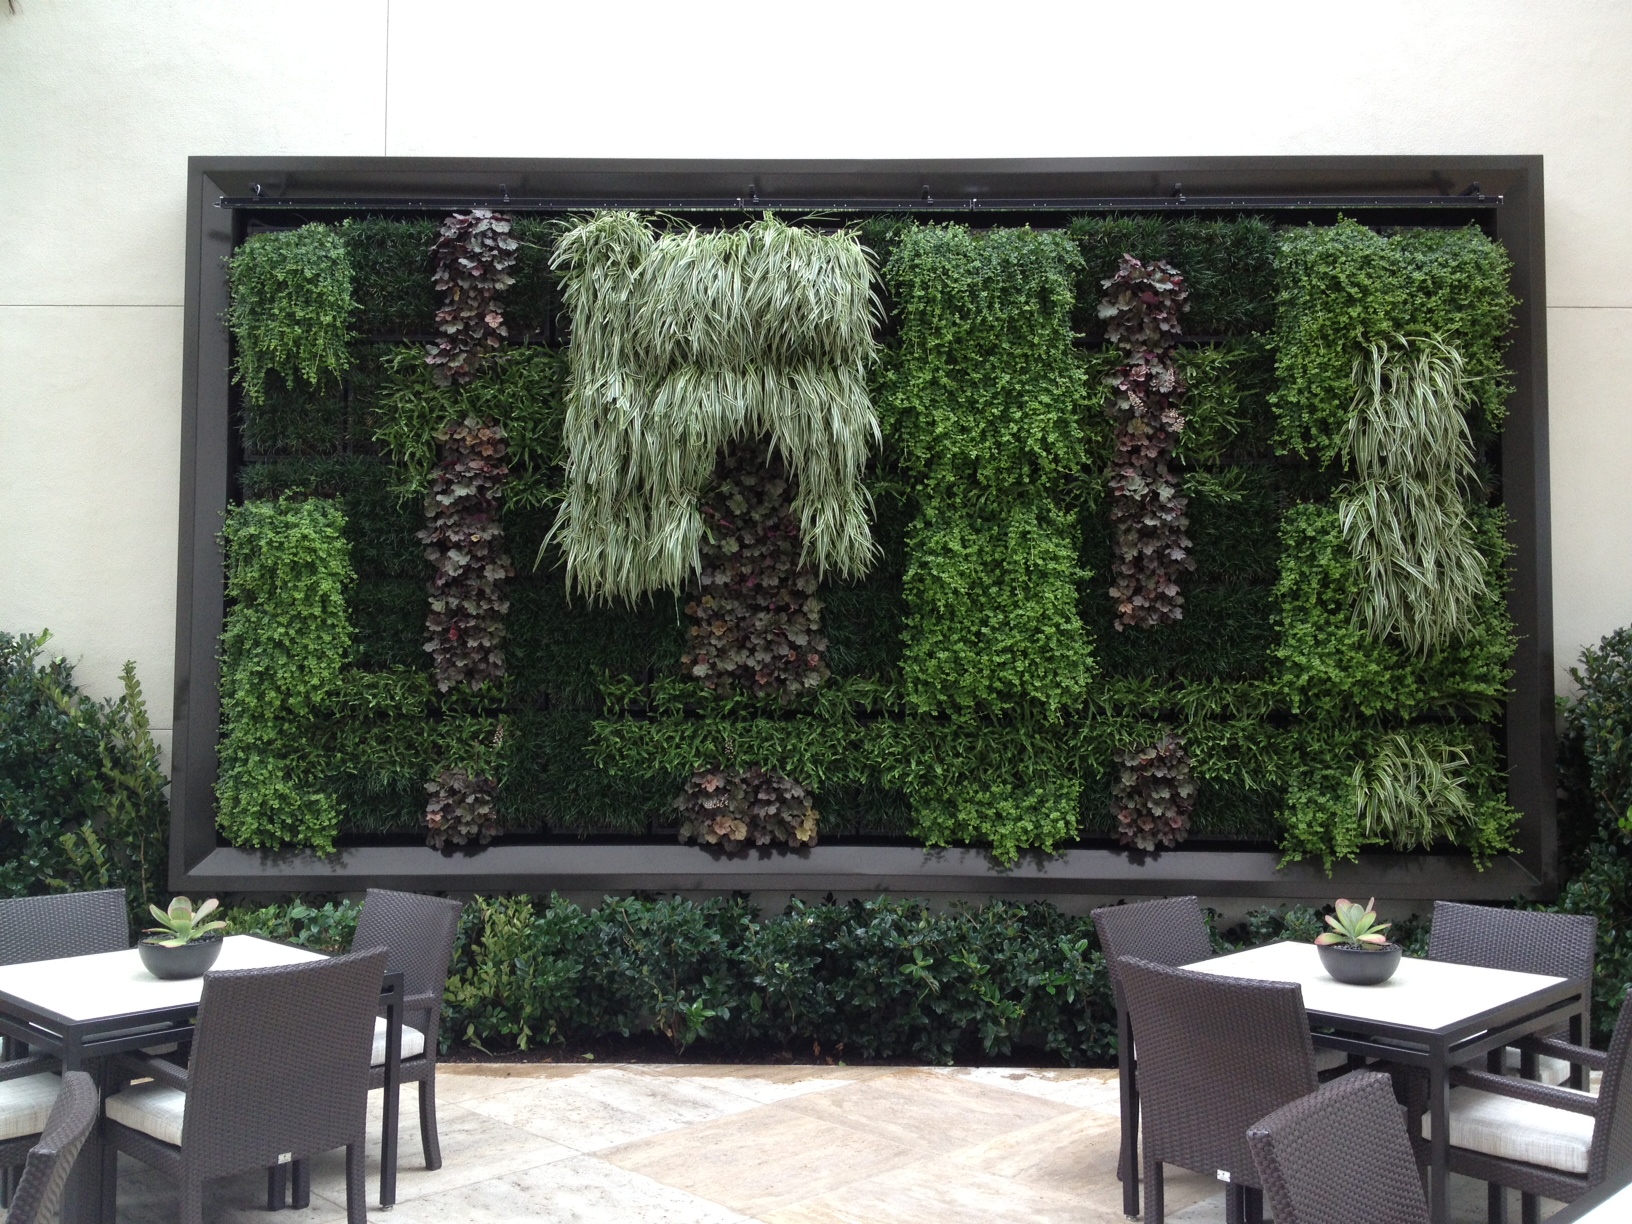 Green walls or living walls provide a spectacular backdrop in nearly any setting. We installed this one for the Irvine Company. 